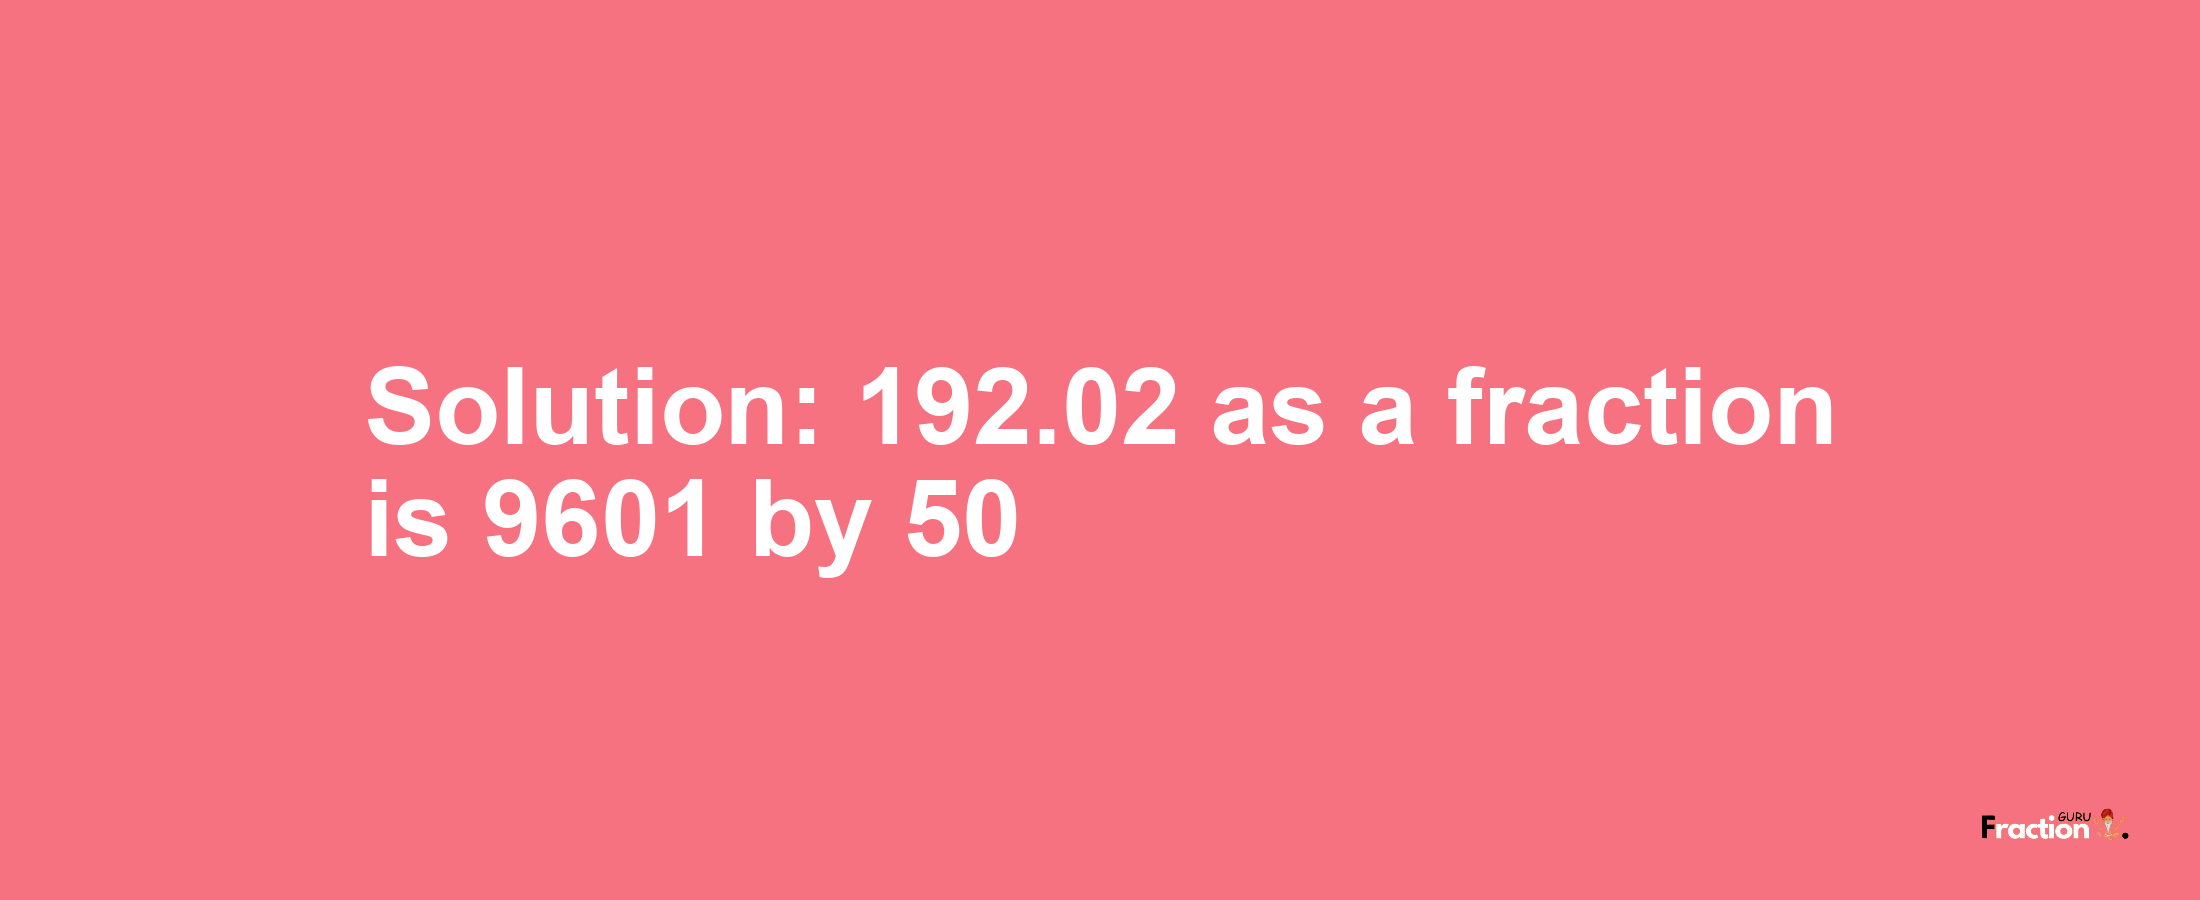 Solution:192.02 as a fraction is 9601/50